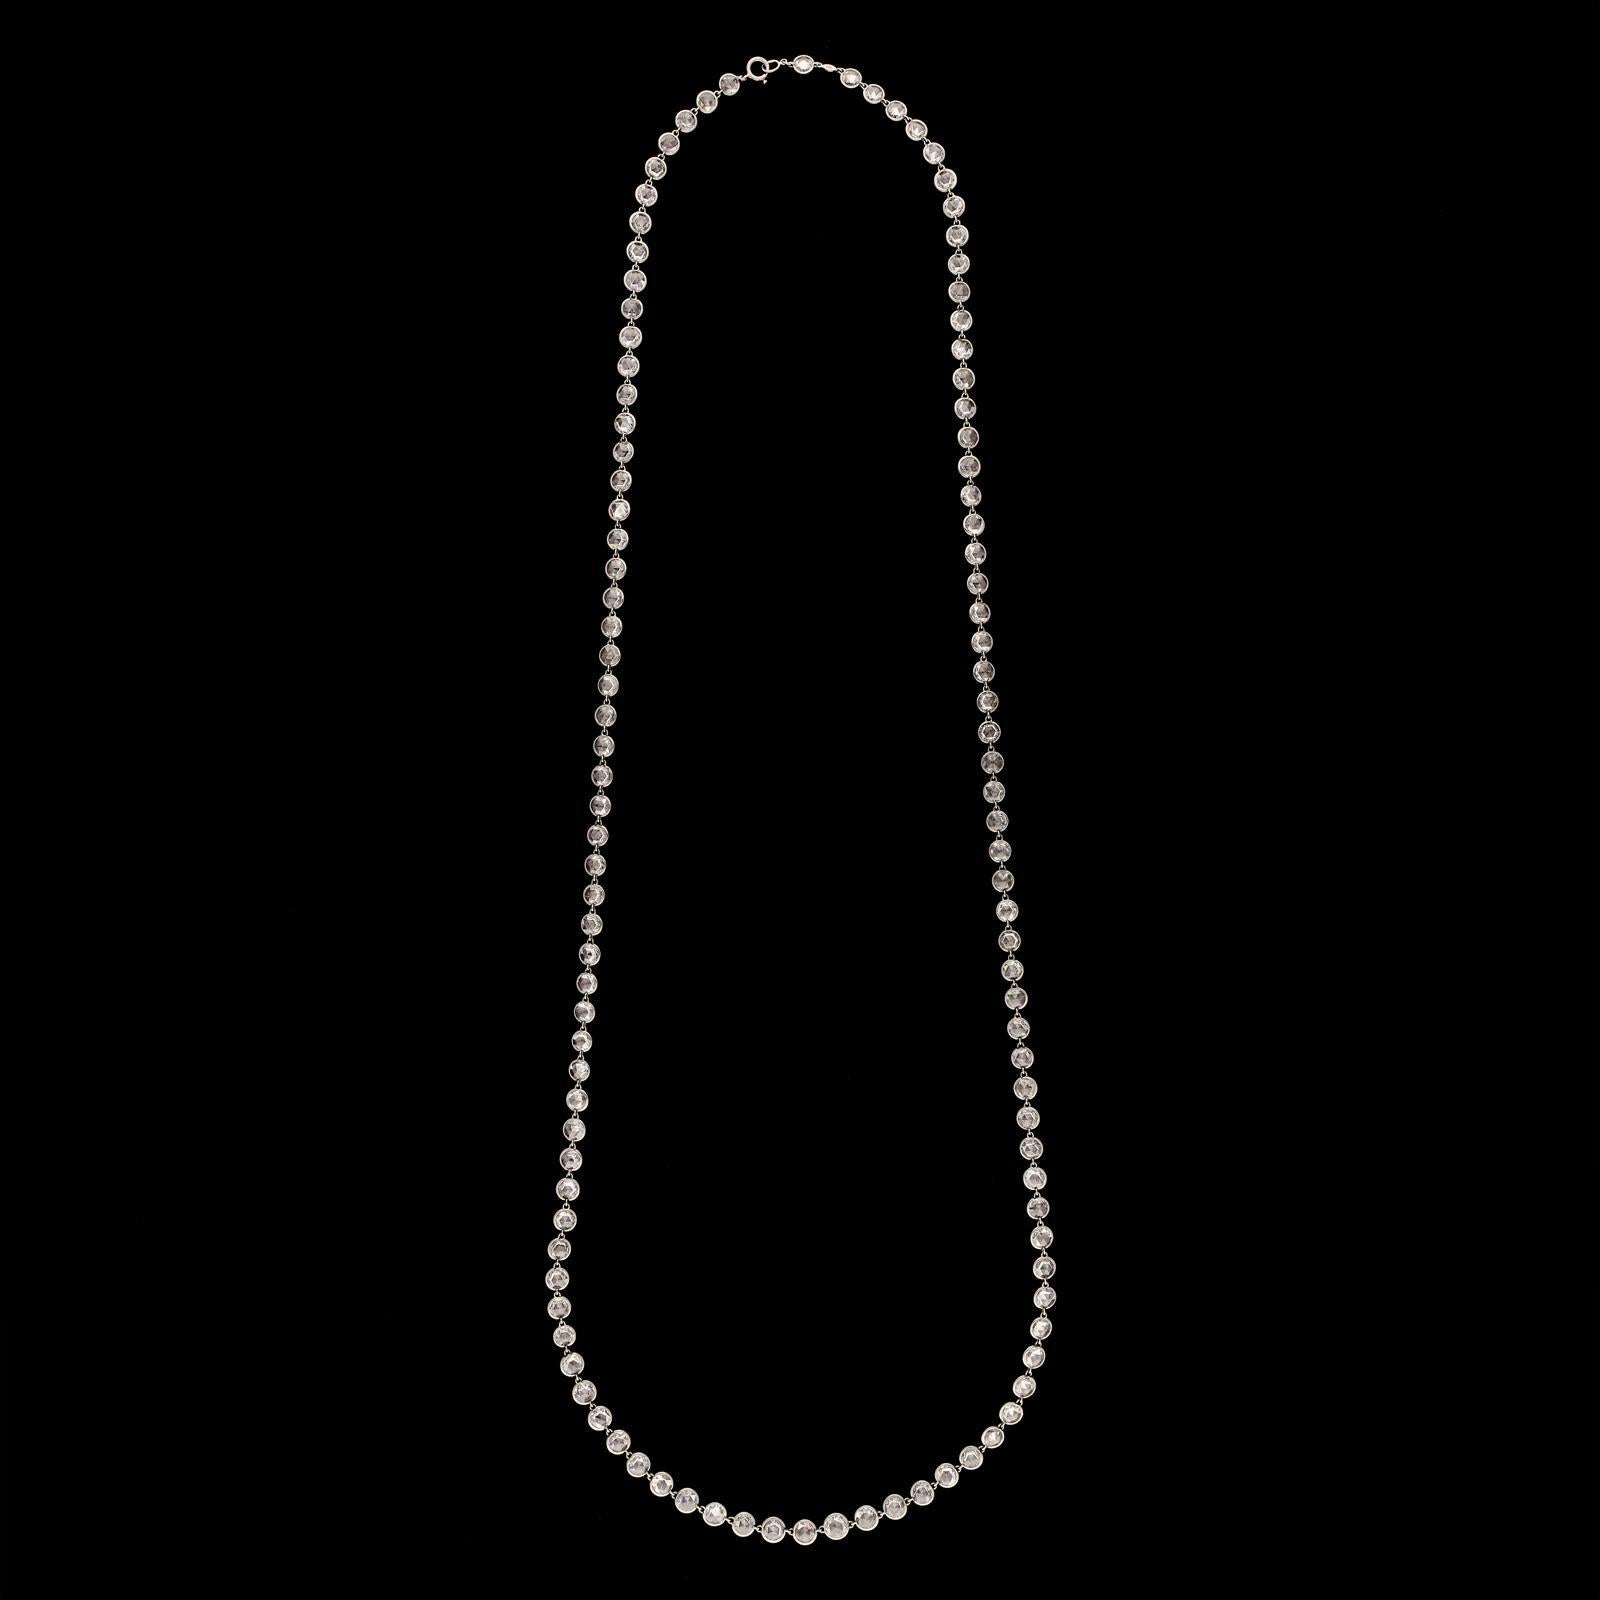 A beautiful diamond and platinum long necklace by Hancocks, the 28